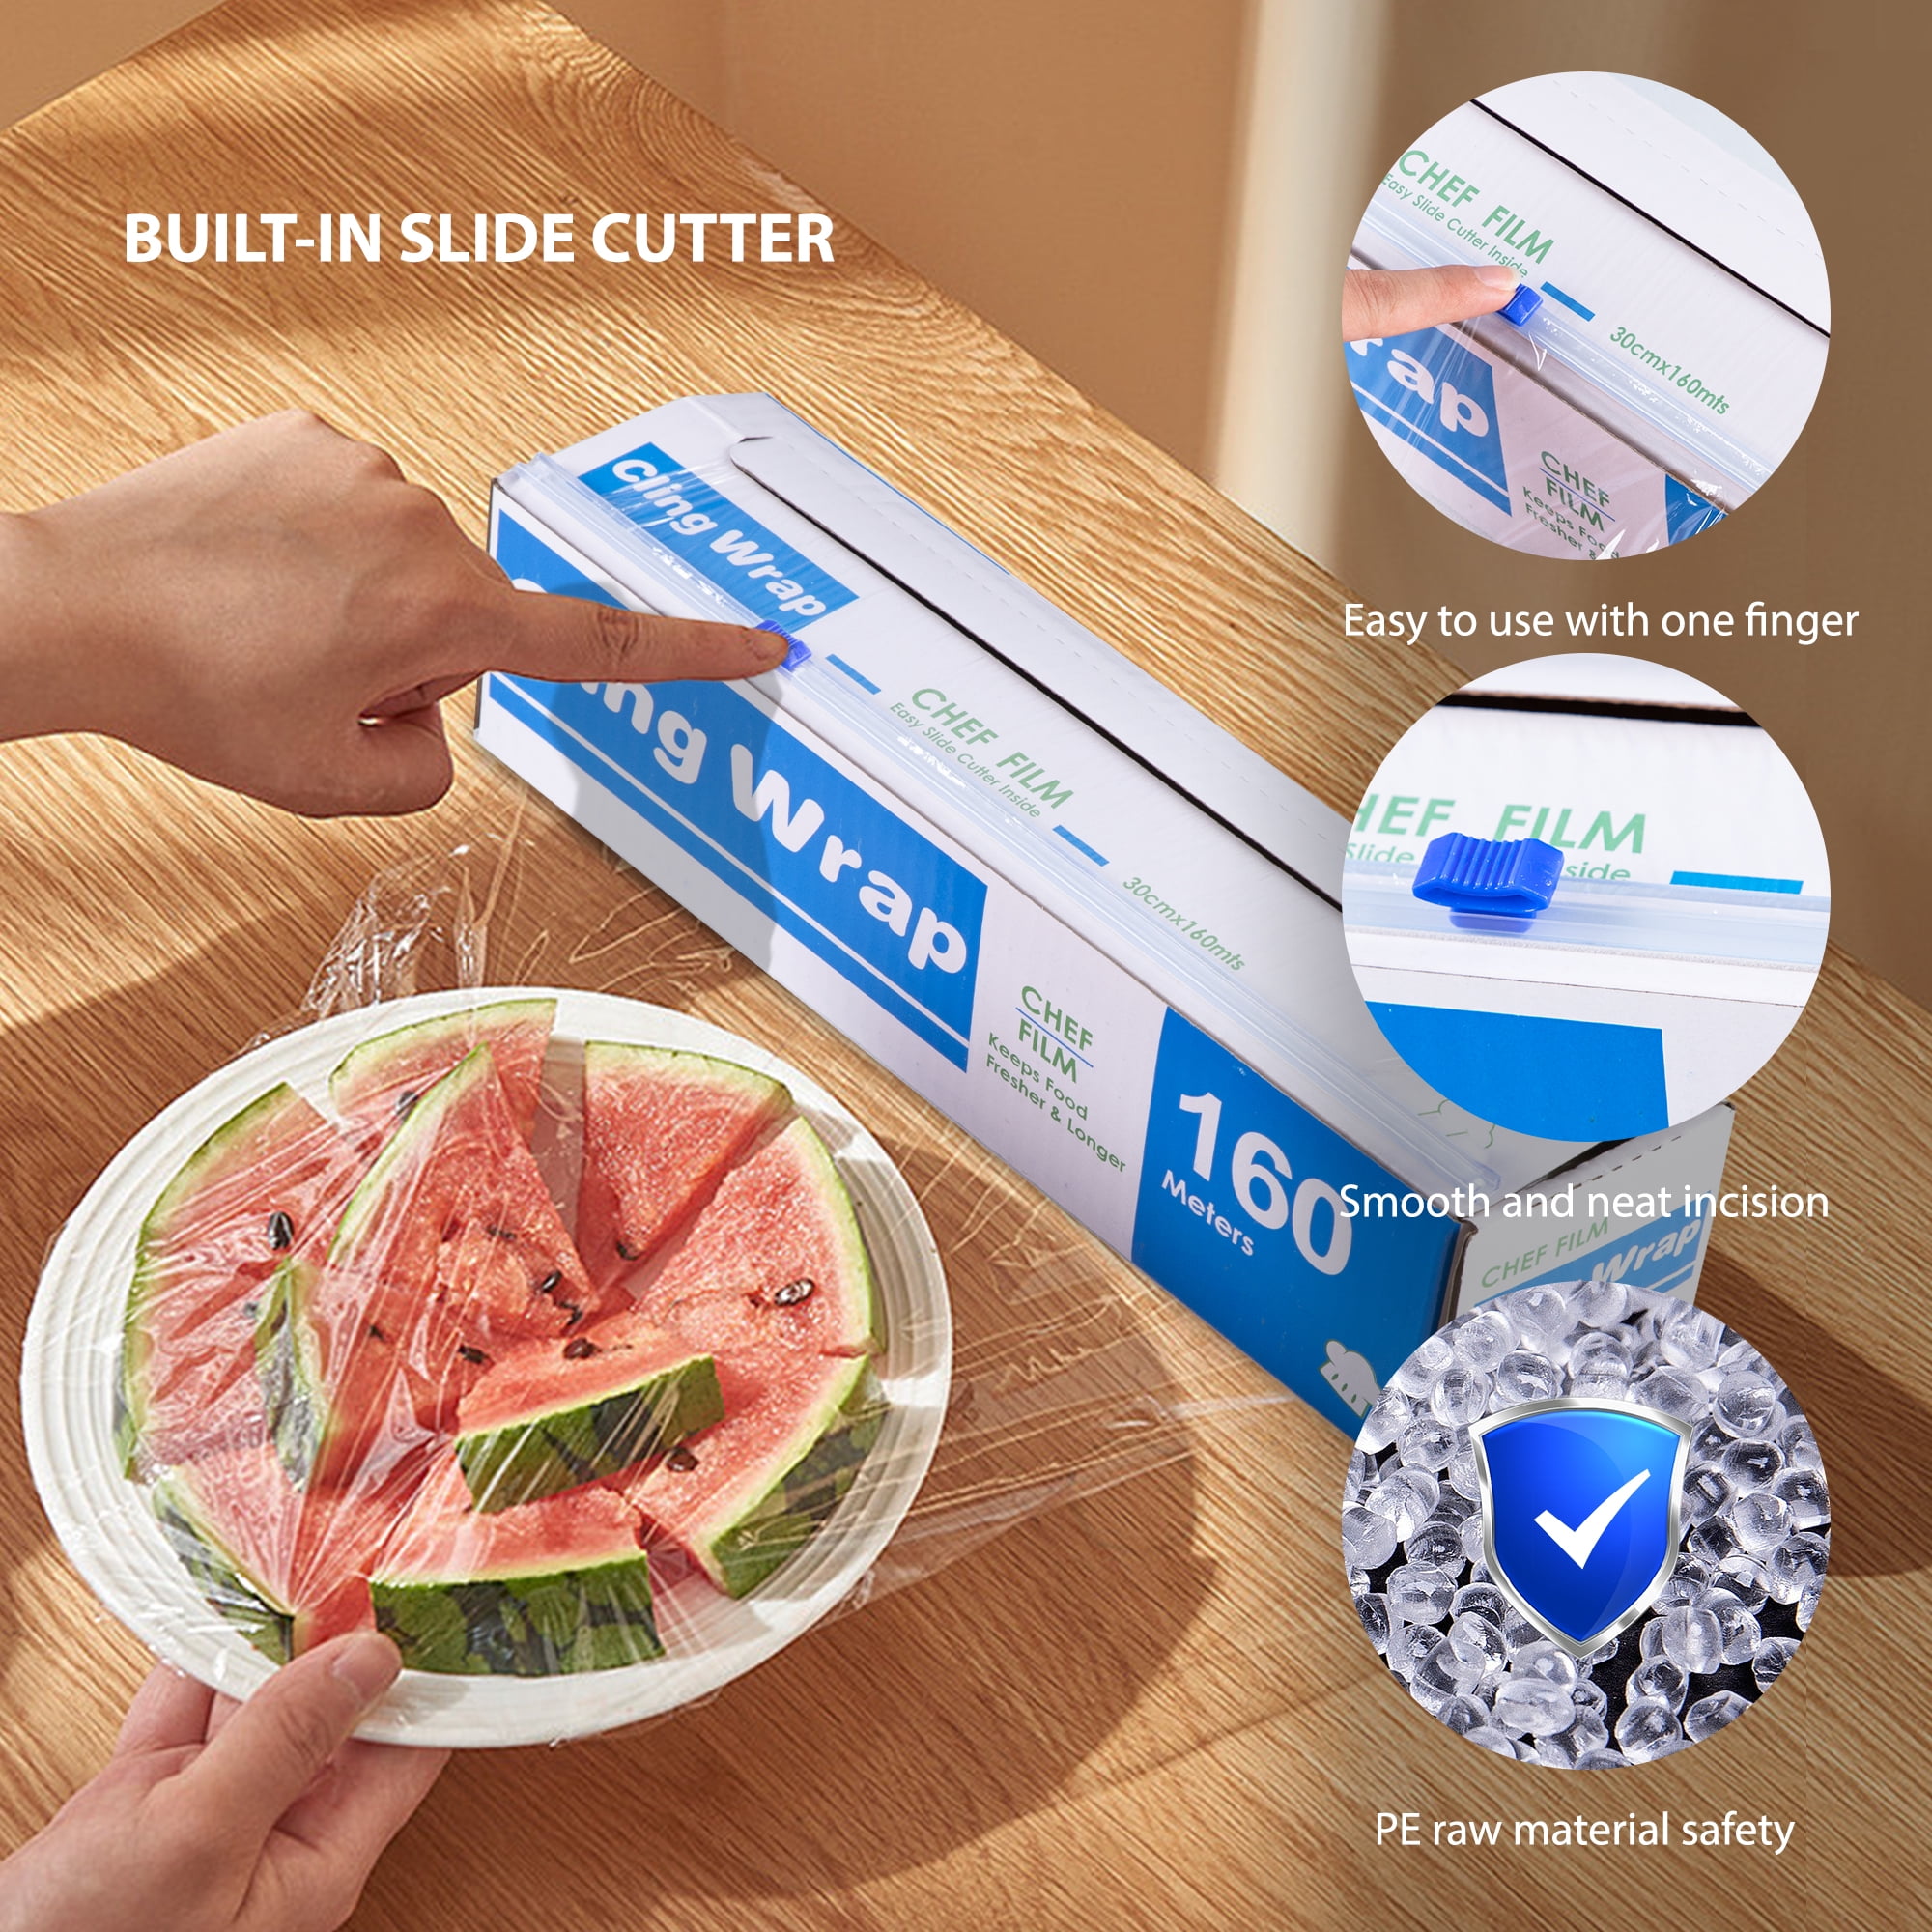 Kitchen Cling Wrap, Cling Film Cover, Plastic Food Wrap With Slide